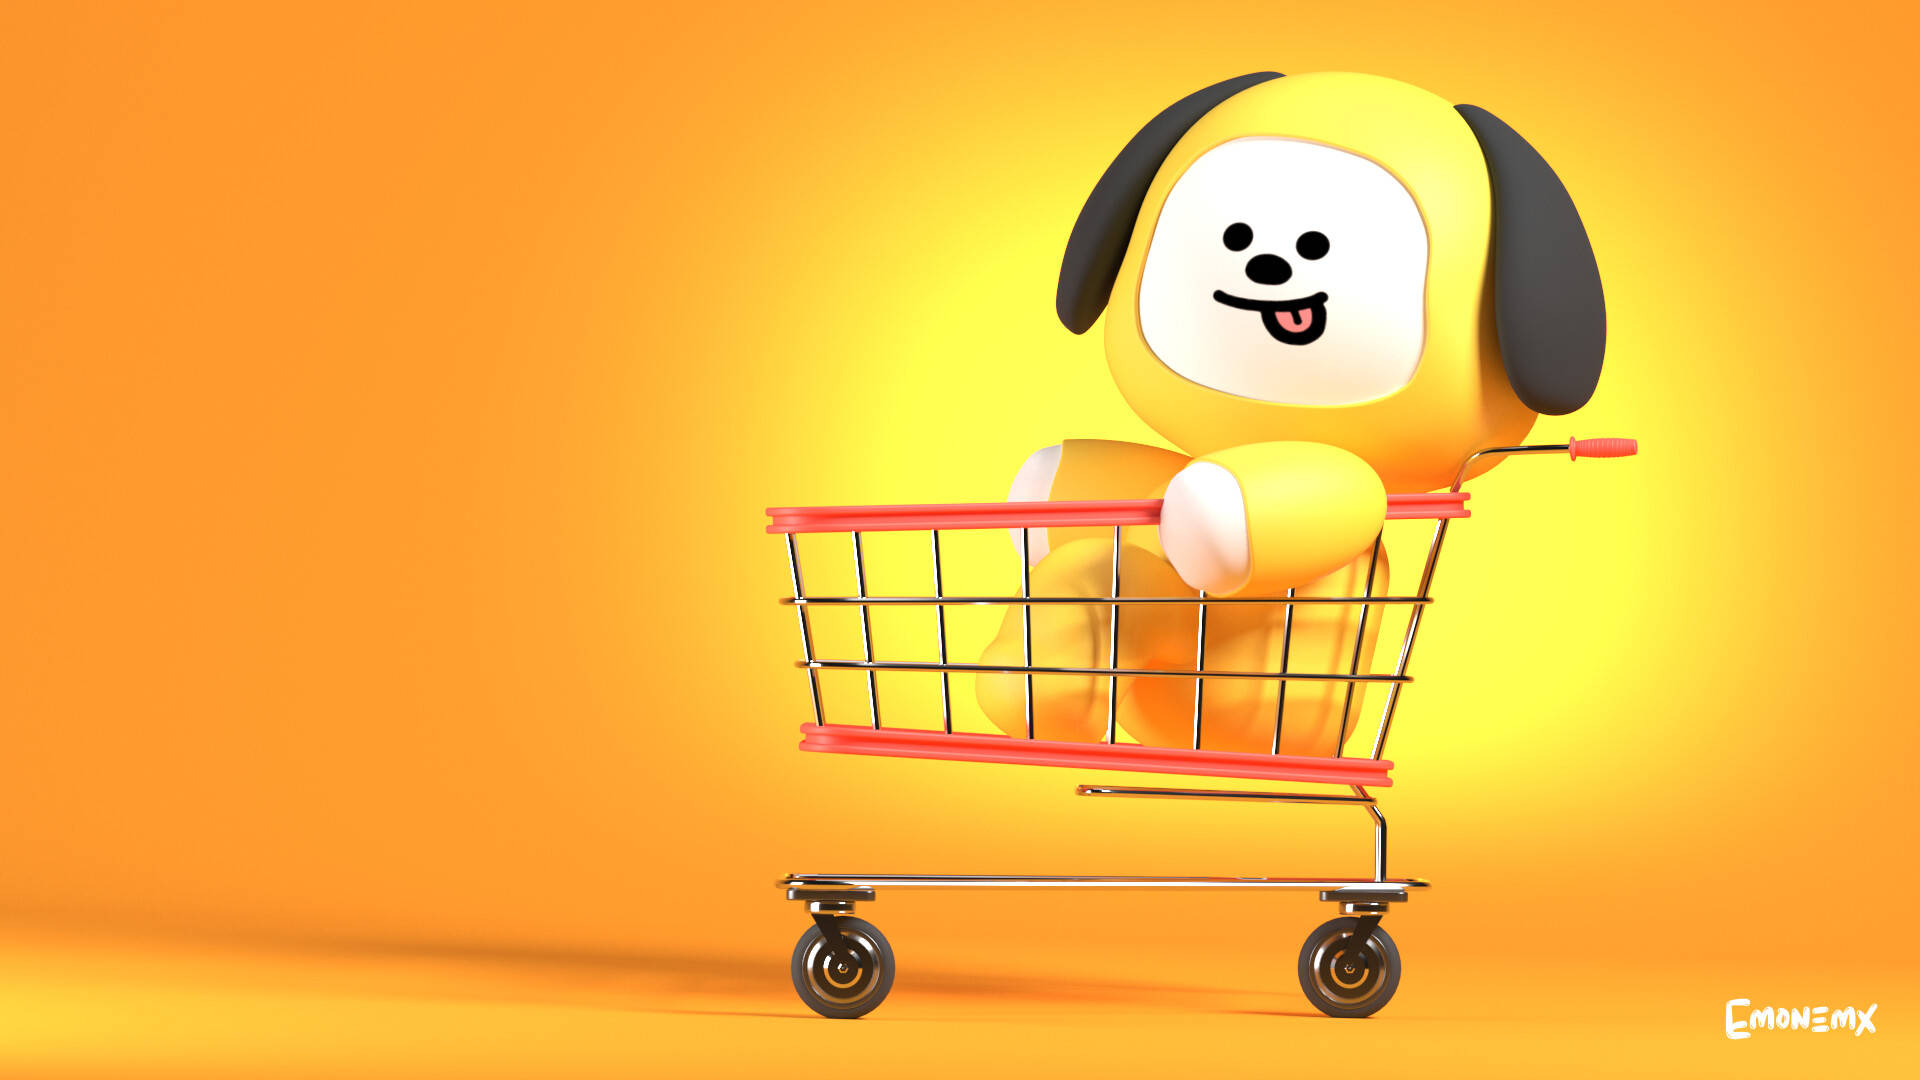 Adorable Chimmy Bt21 In A Playful Mood! Background